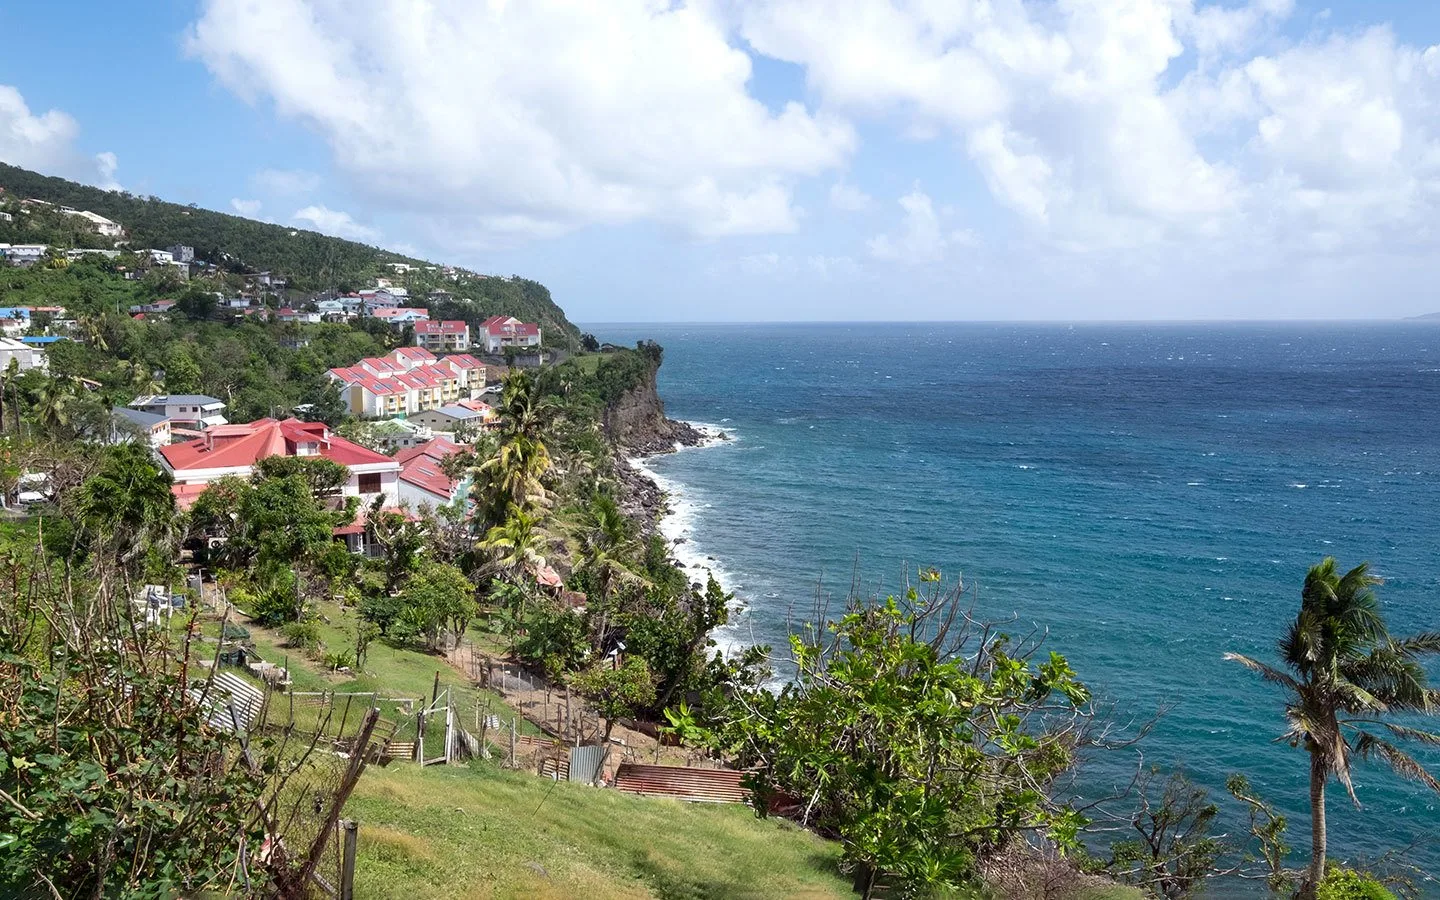 Views along the coast of Basse-Terre, Guadeloupe